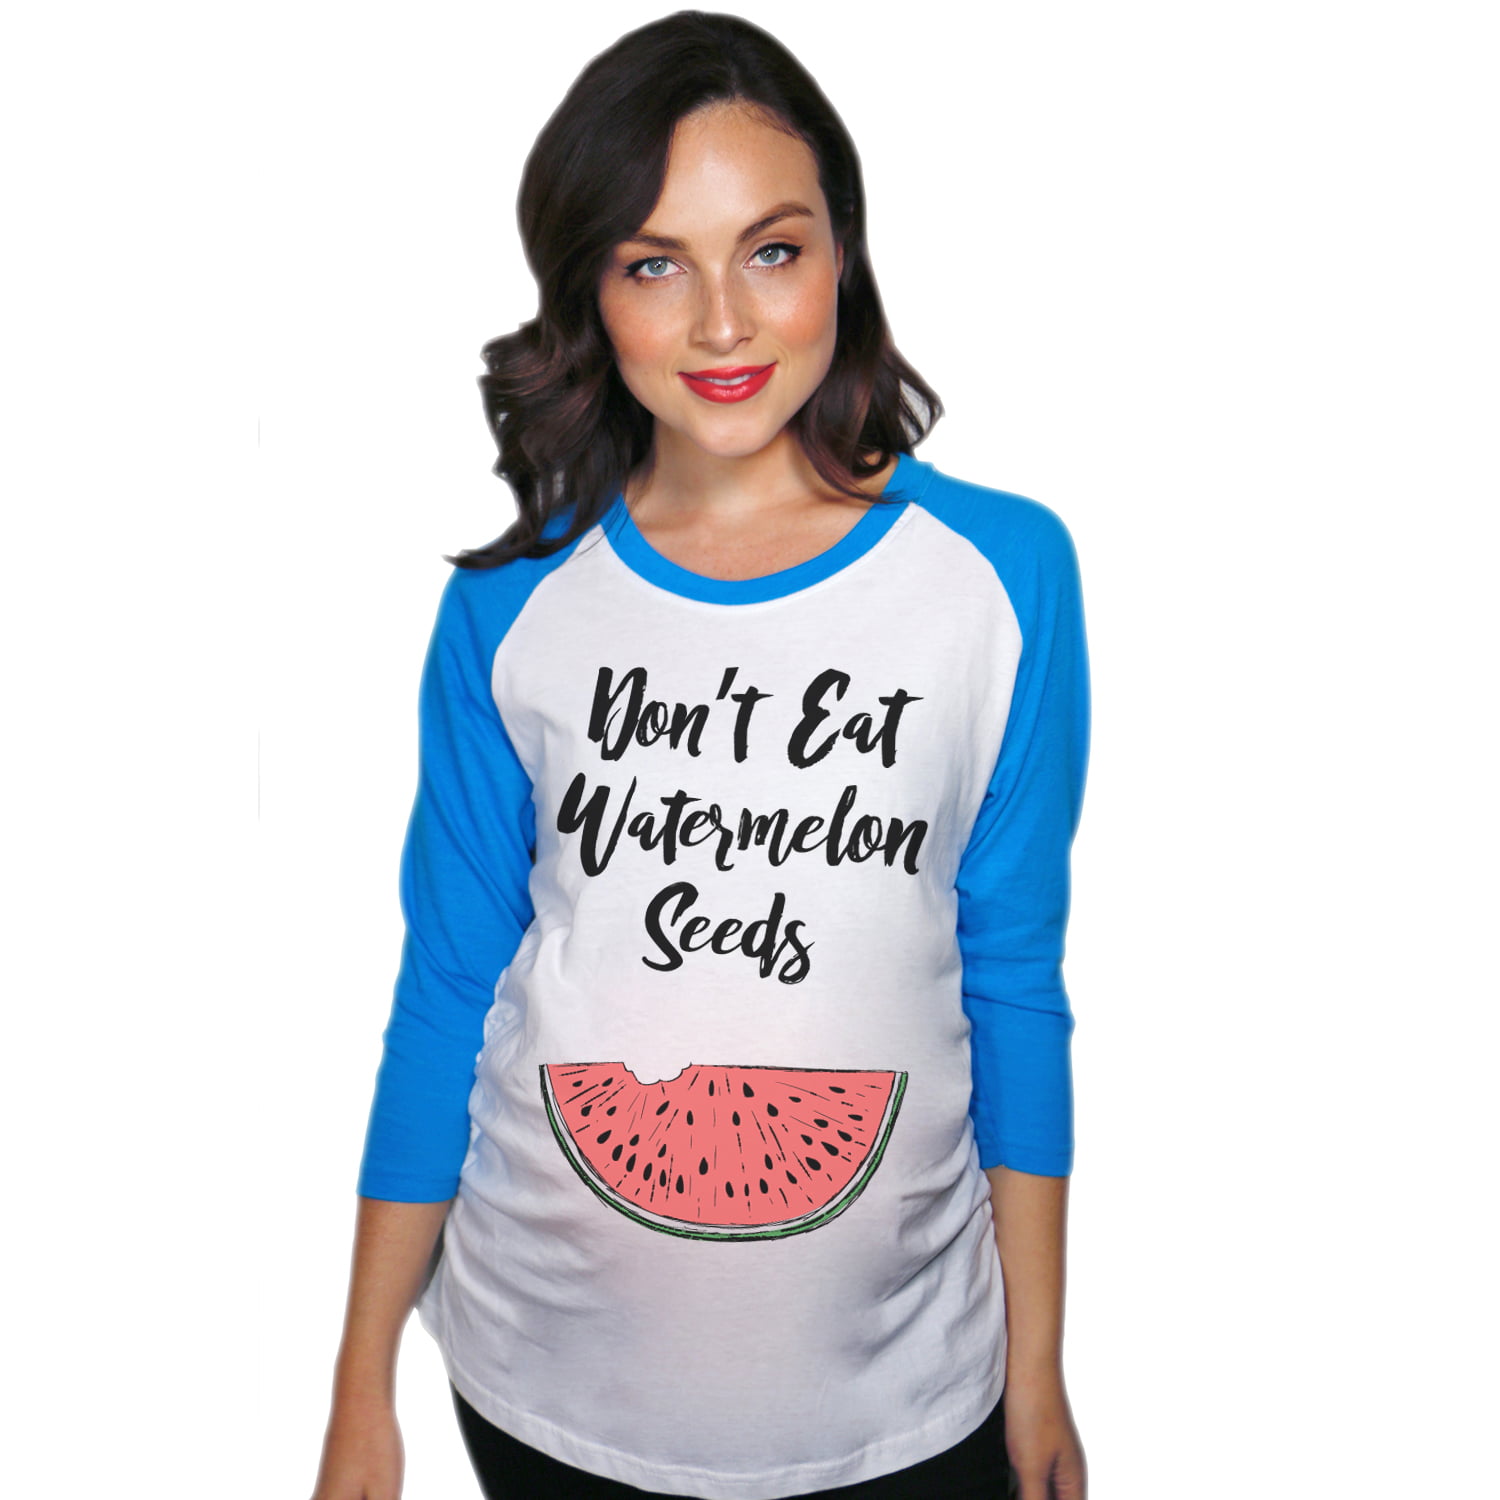 Pregnancy Shirts Maternity T shirts Top Tunic Clothes Don't Eat Watermelon Seeds 